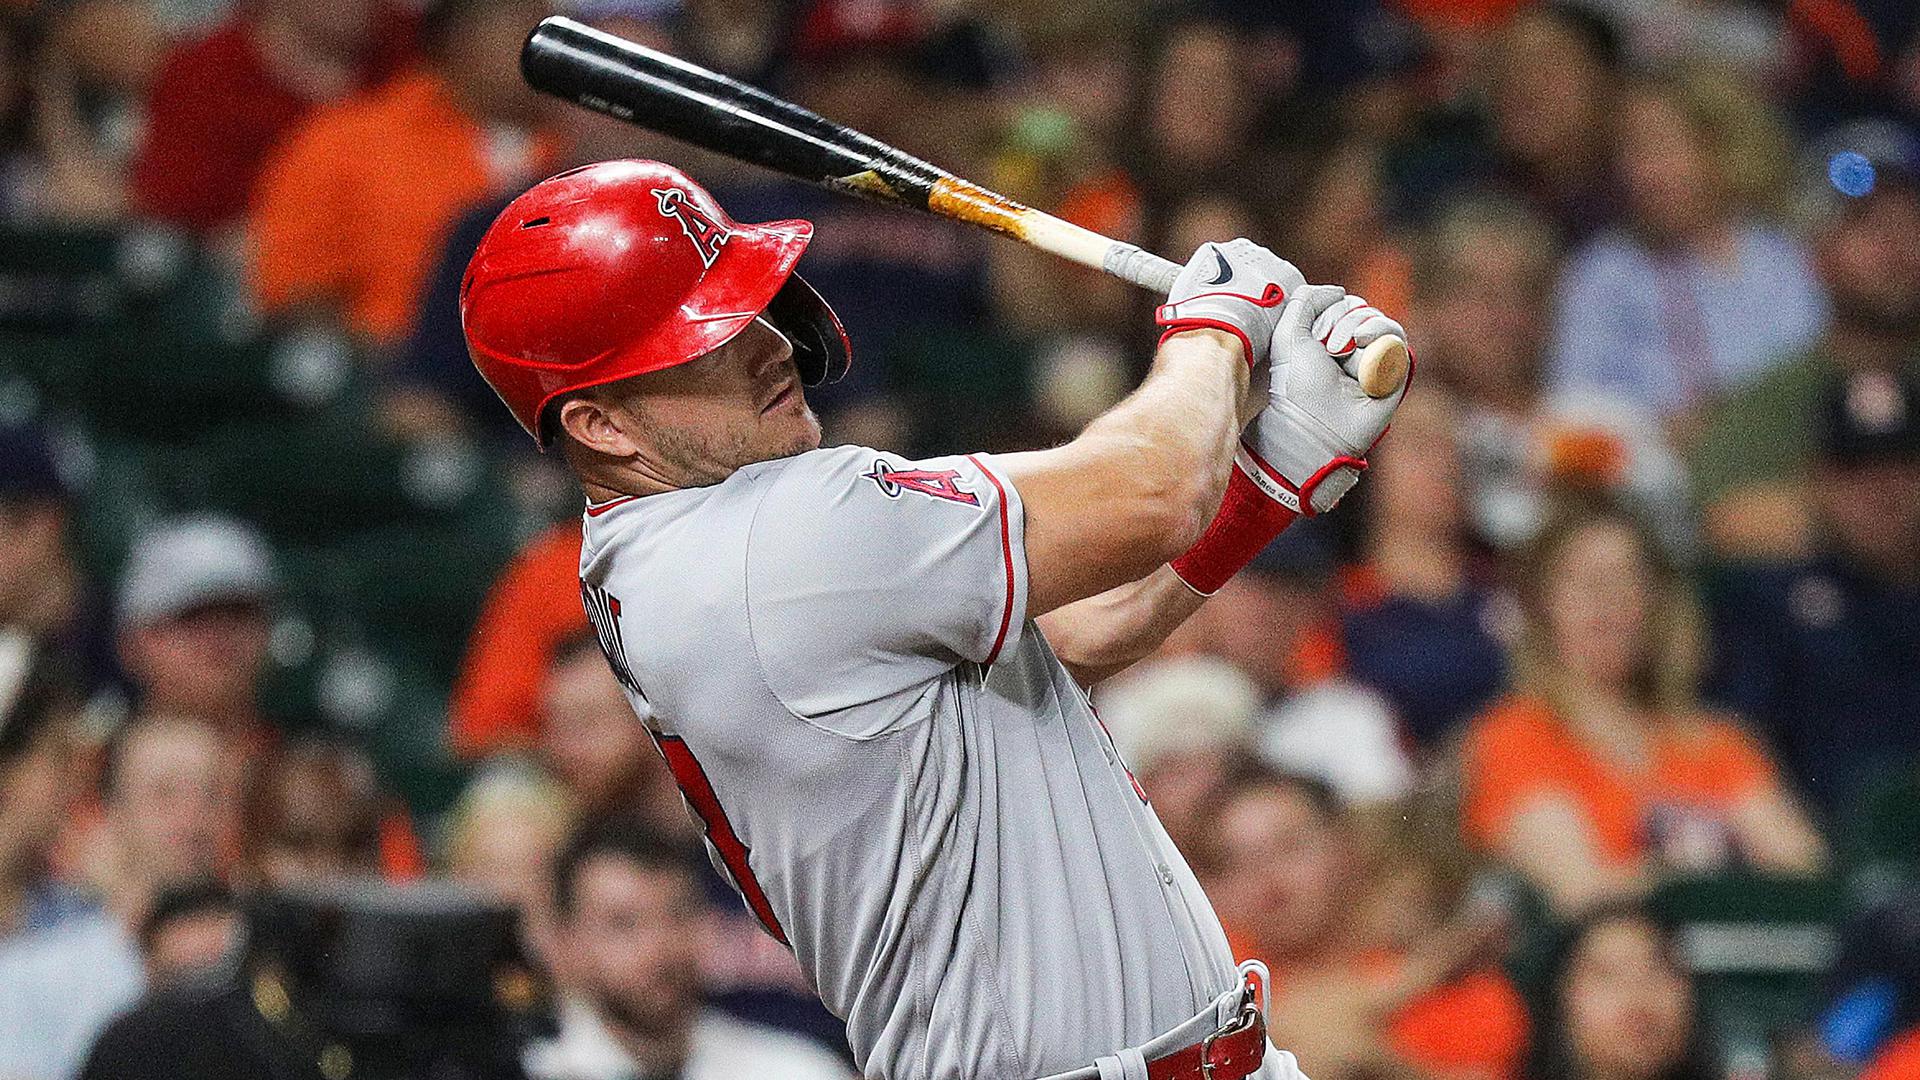 Mike Trout follows through on a swing for a home run